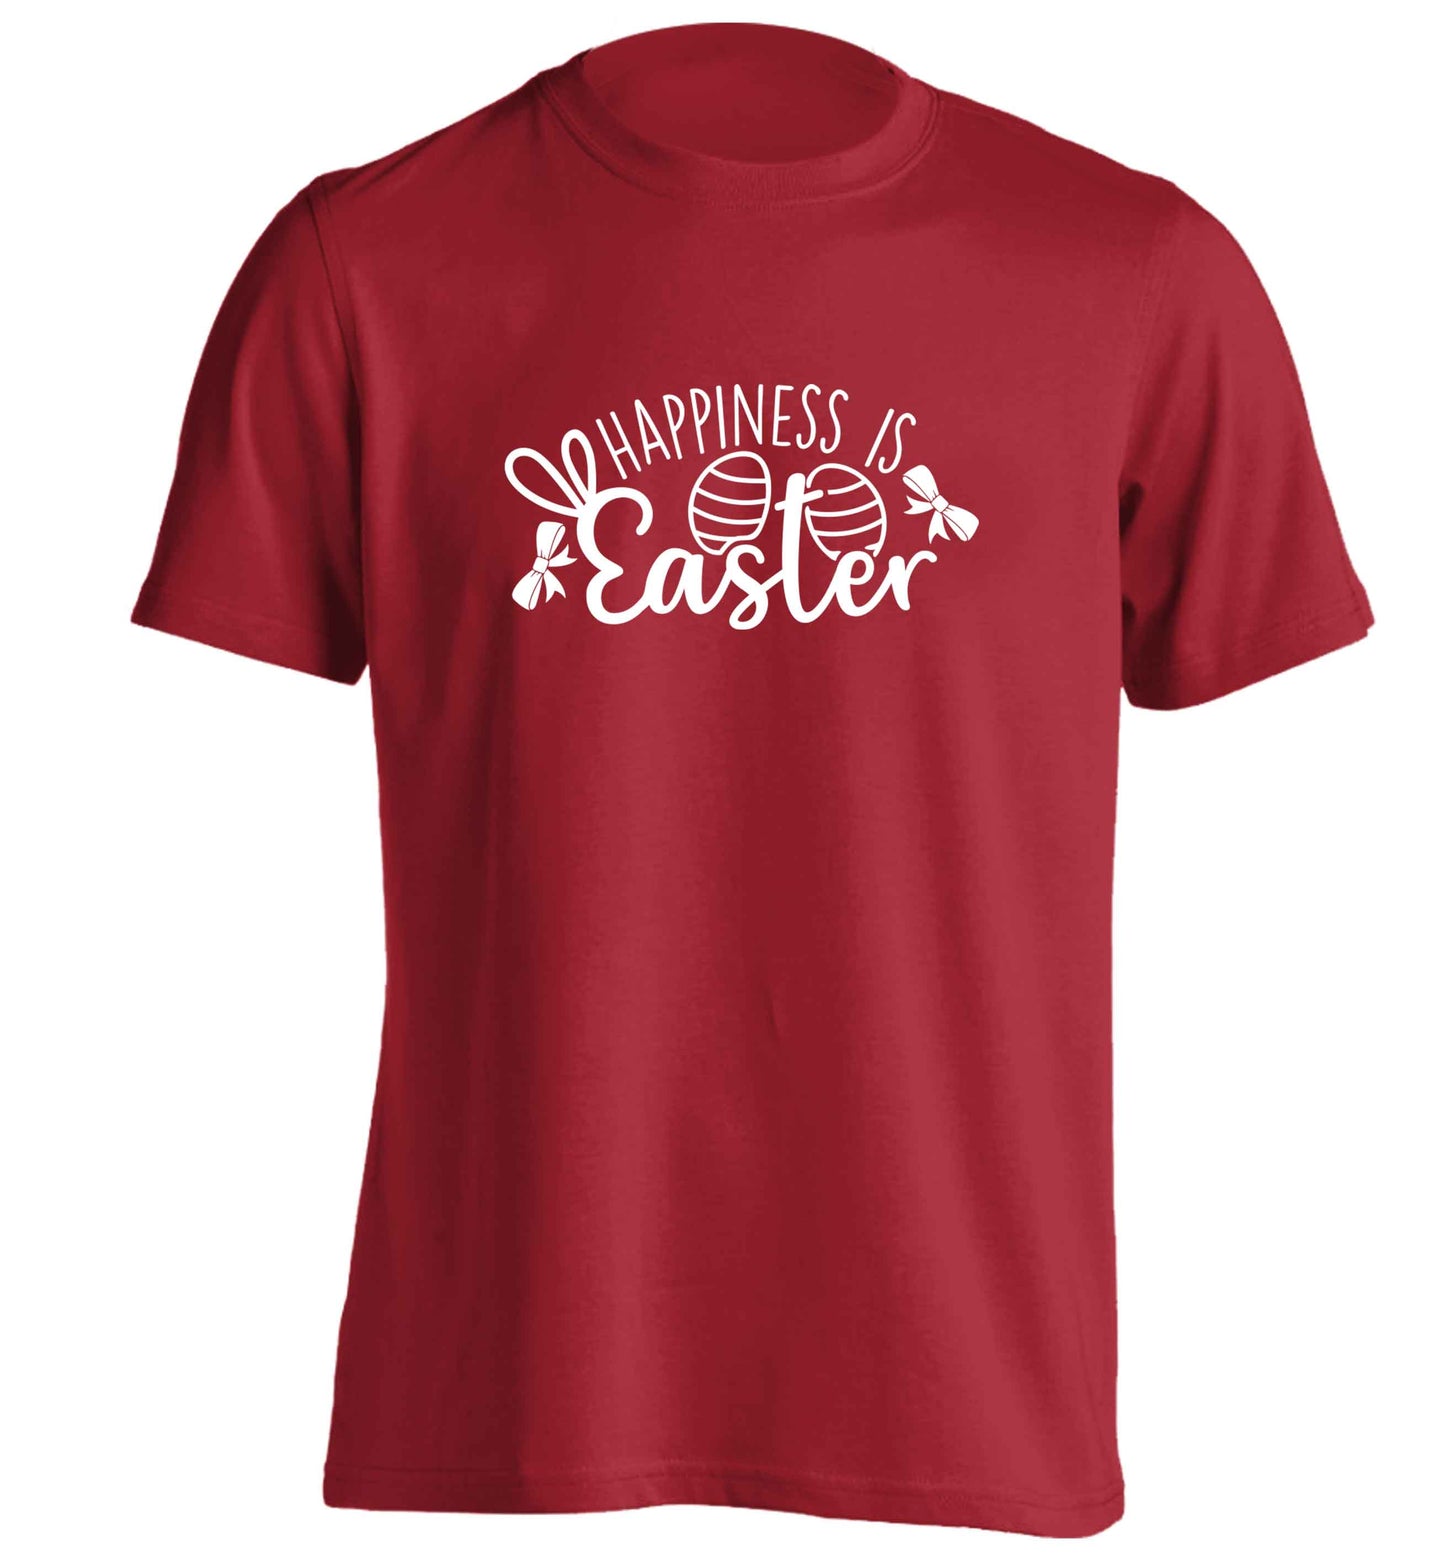 Happiness is easter adults unisex red Tshirt 2XL